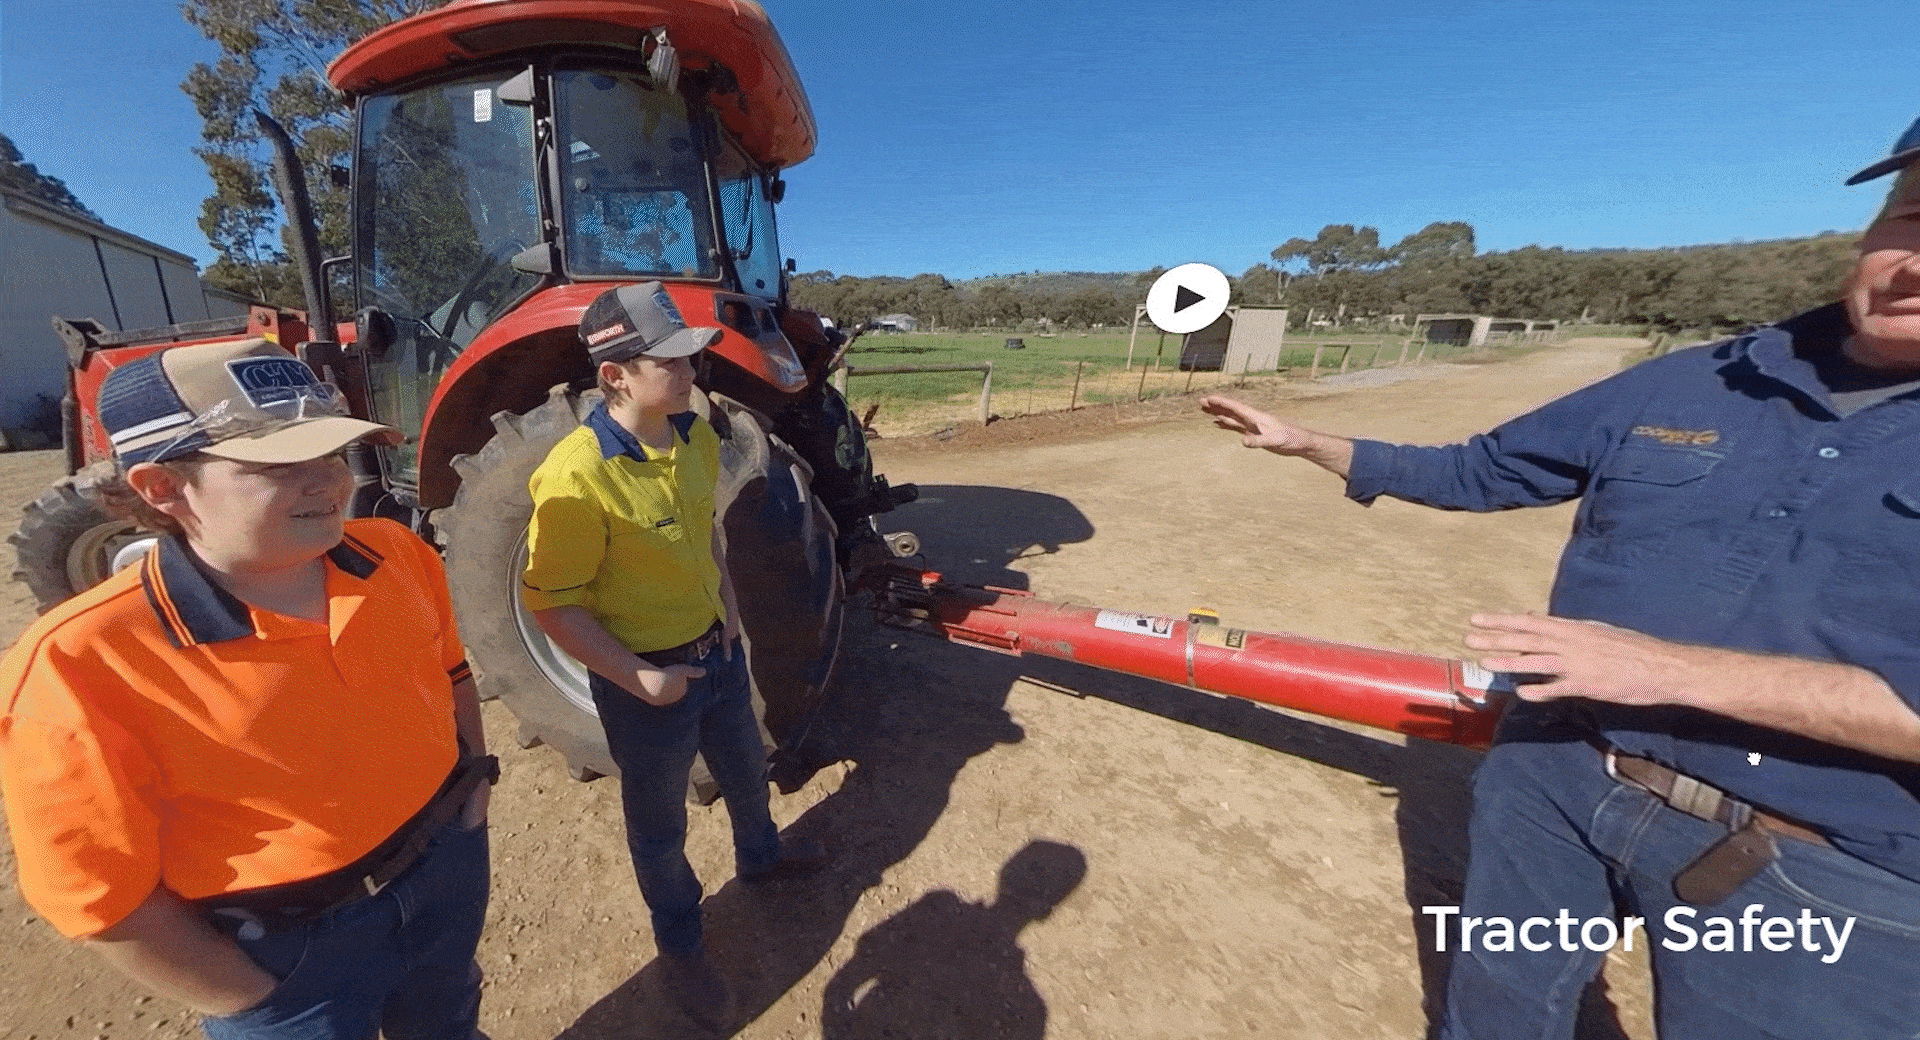 360 farm safety virtual tour developed by Think Digital Studios for PIEFA